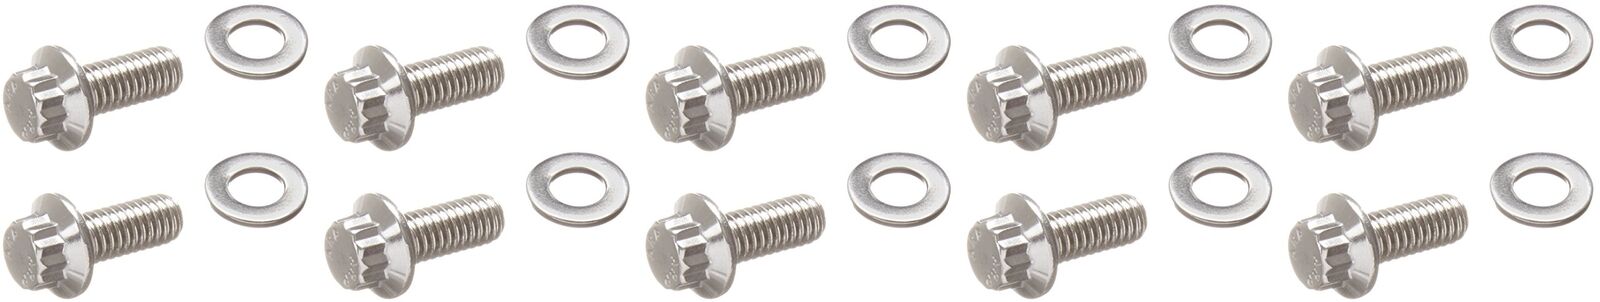 ARP 4373001 Stainless Steel Bolt Kit For Rear End Cover On Select GM 10-Bolt Applications